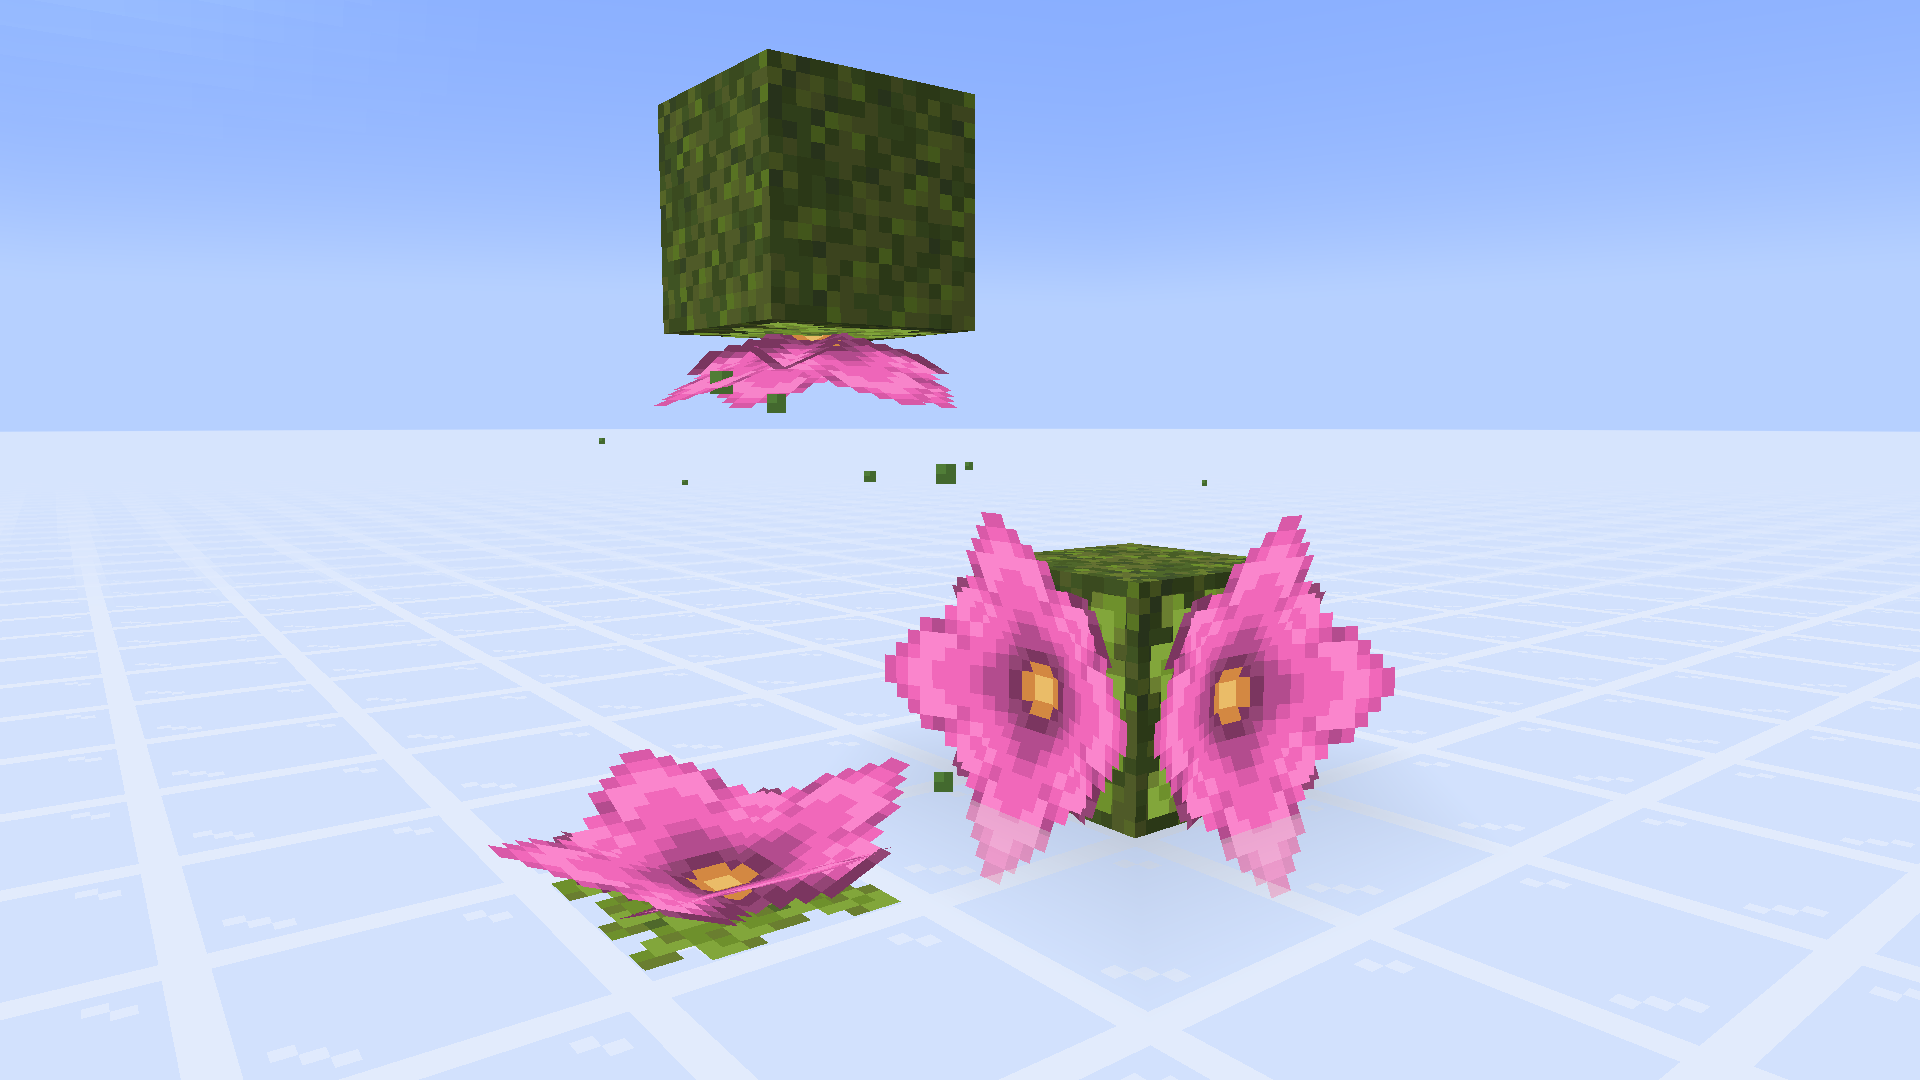 4 fully-grown spore blossoms placed in different orientations